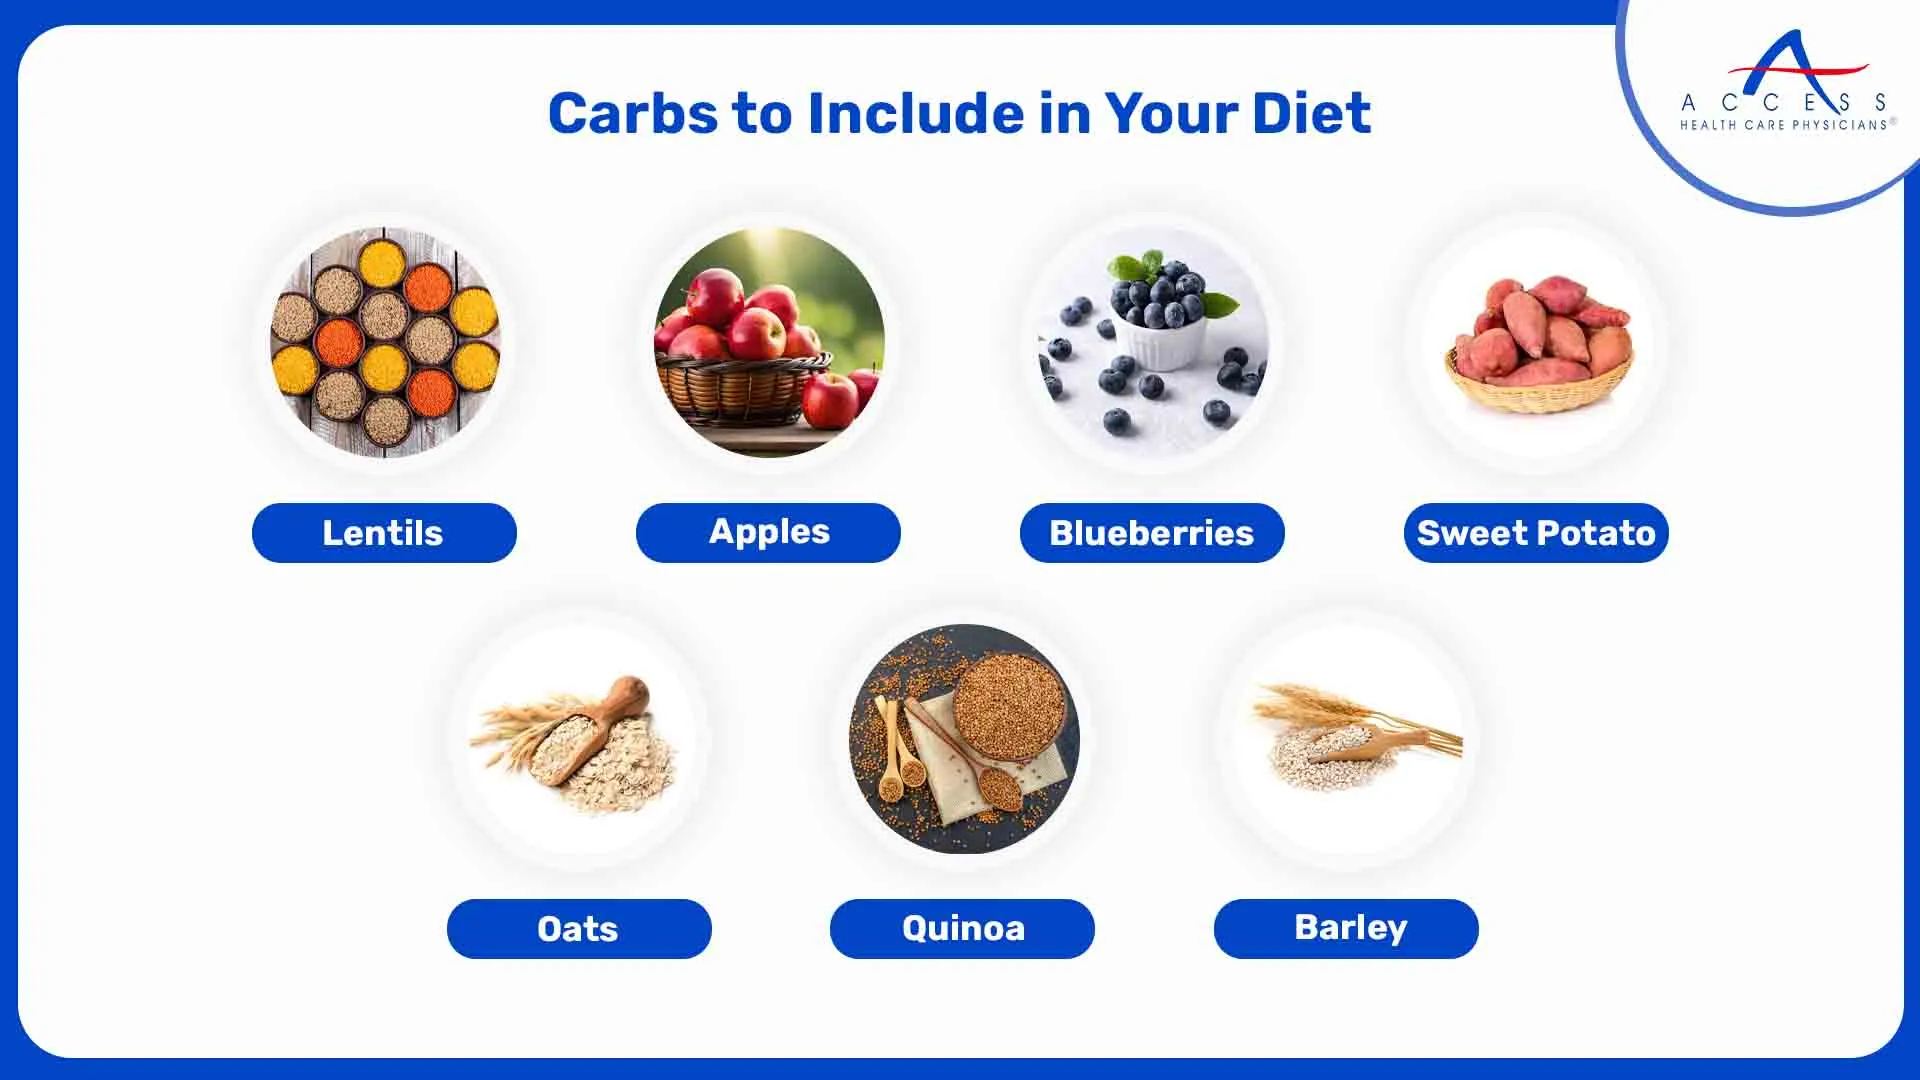 Carbs to Include in Your Diet